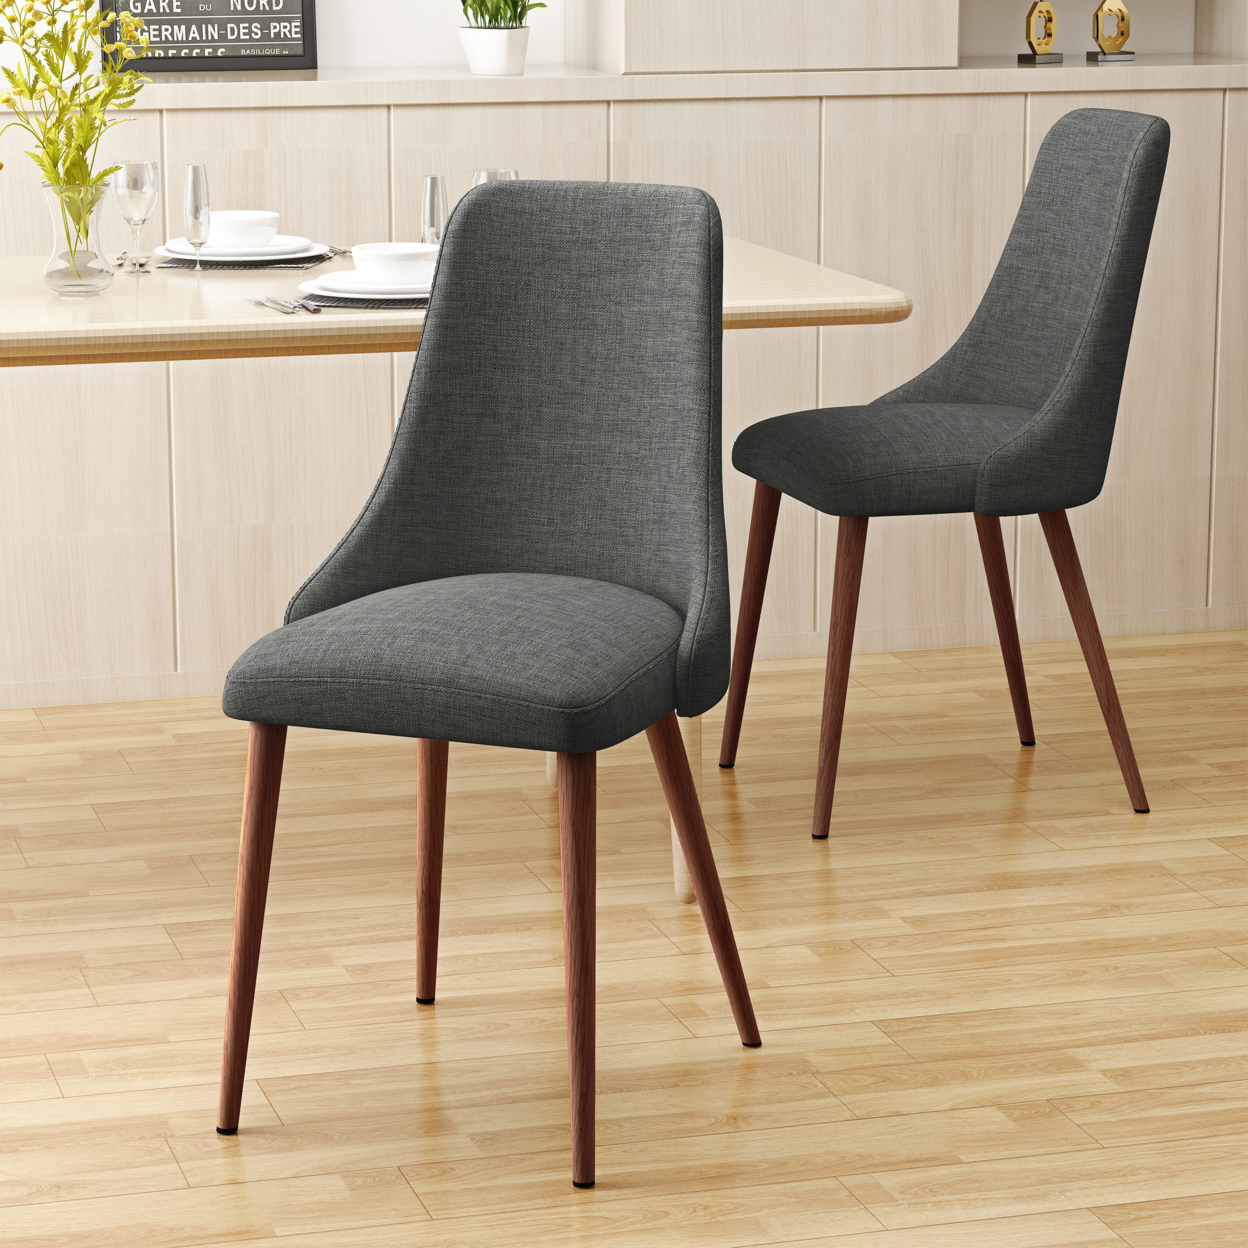 Soloman Mid Century Fabric Dining Chairs With Wood Finished Legs - Set Of 2 - Light Gray